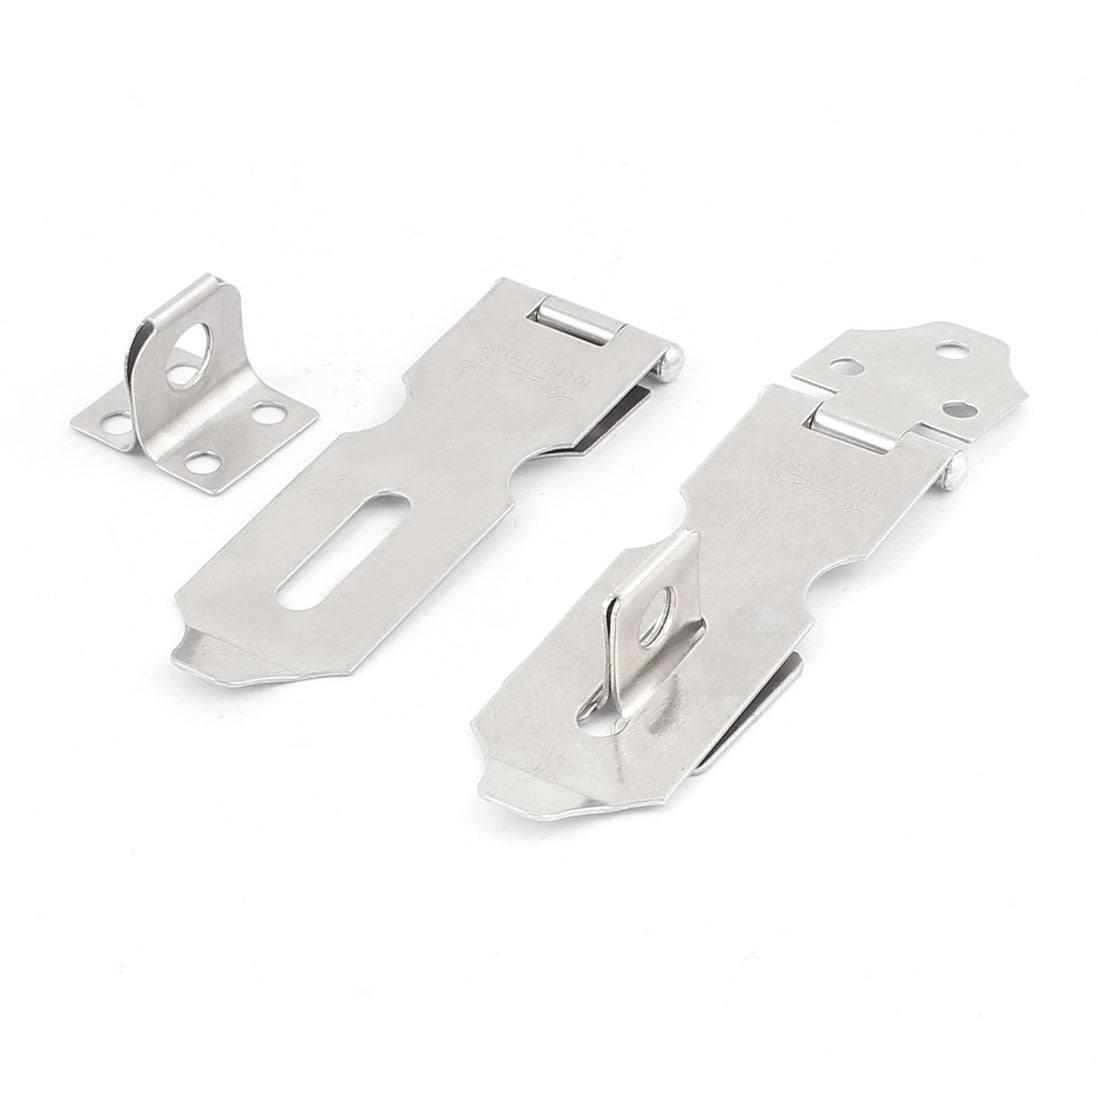 uxcell Uxcell Cupboard Gate Safety Padlock Latch Metal Door Hasp Staple Silver Tone 2 Sets